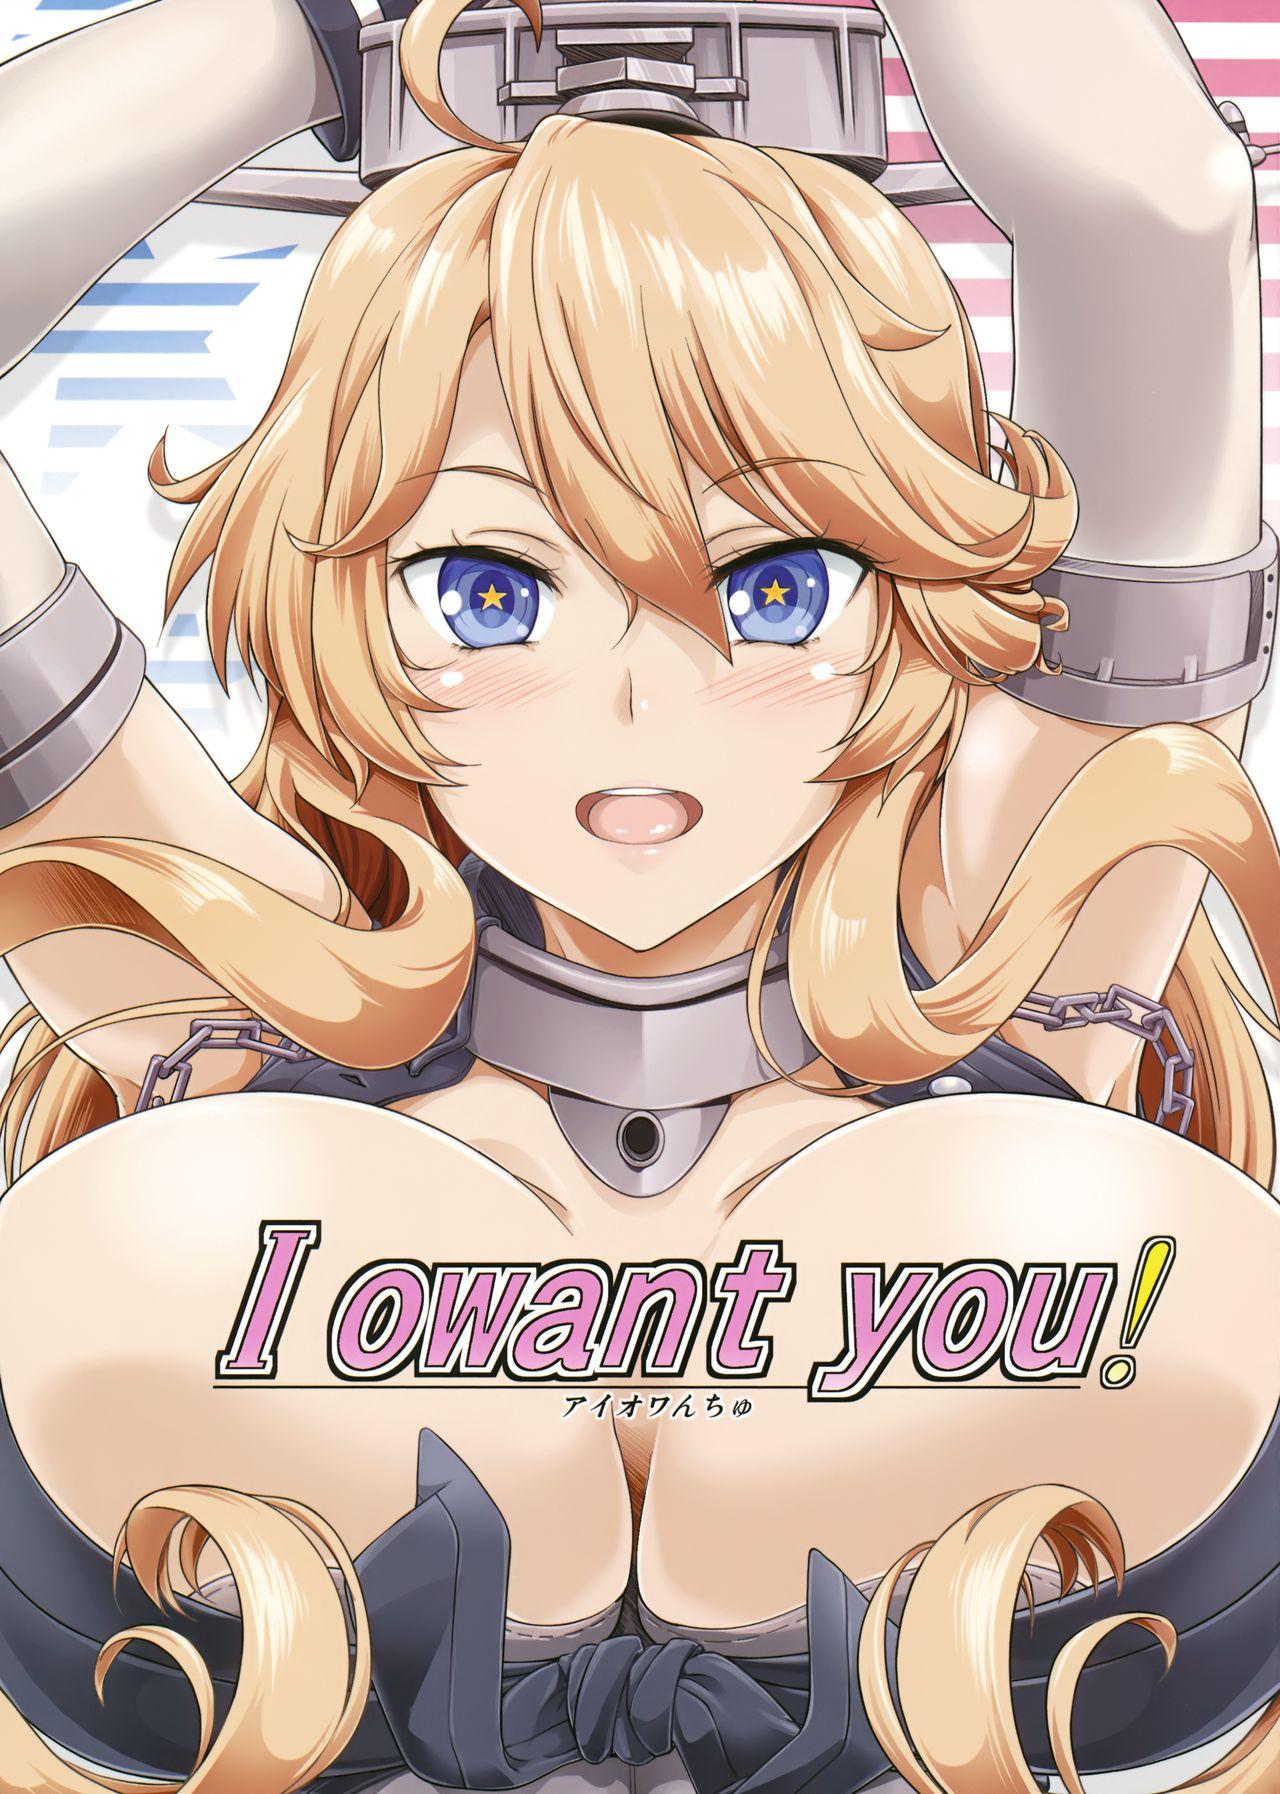 Xxx I owant you! - Kantai collection Argentino - Picture 1